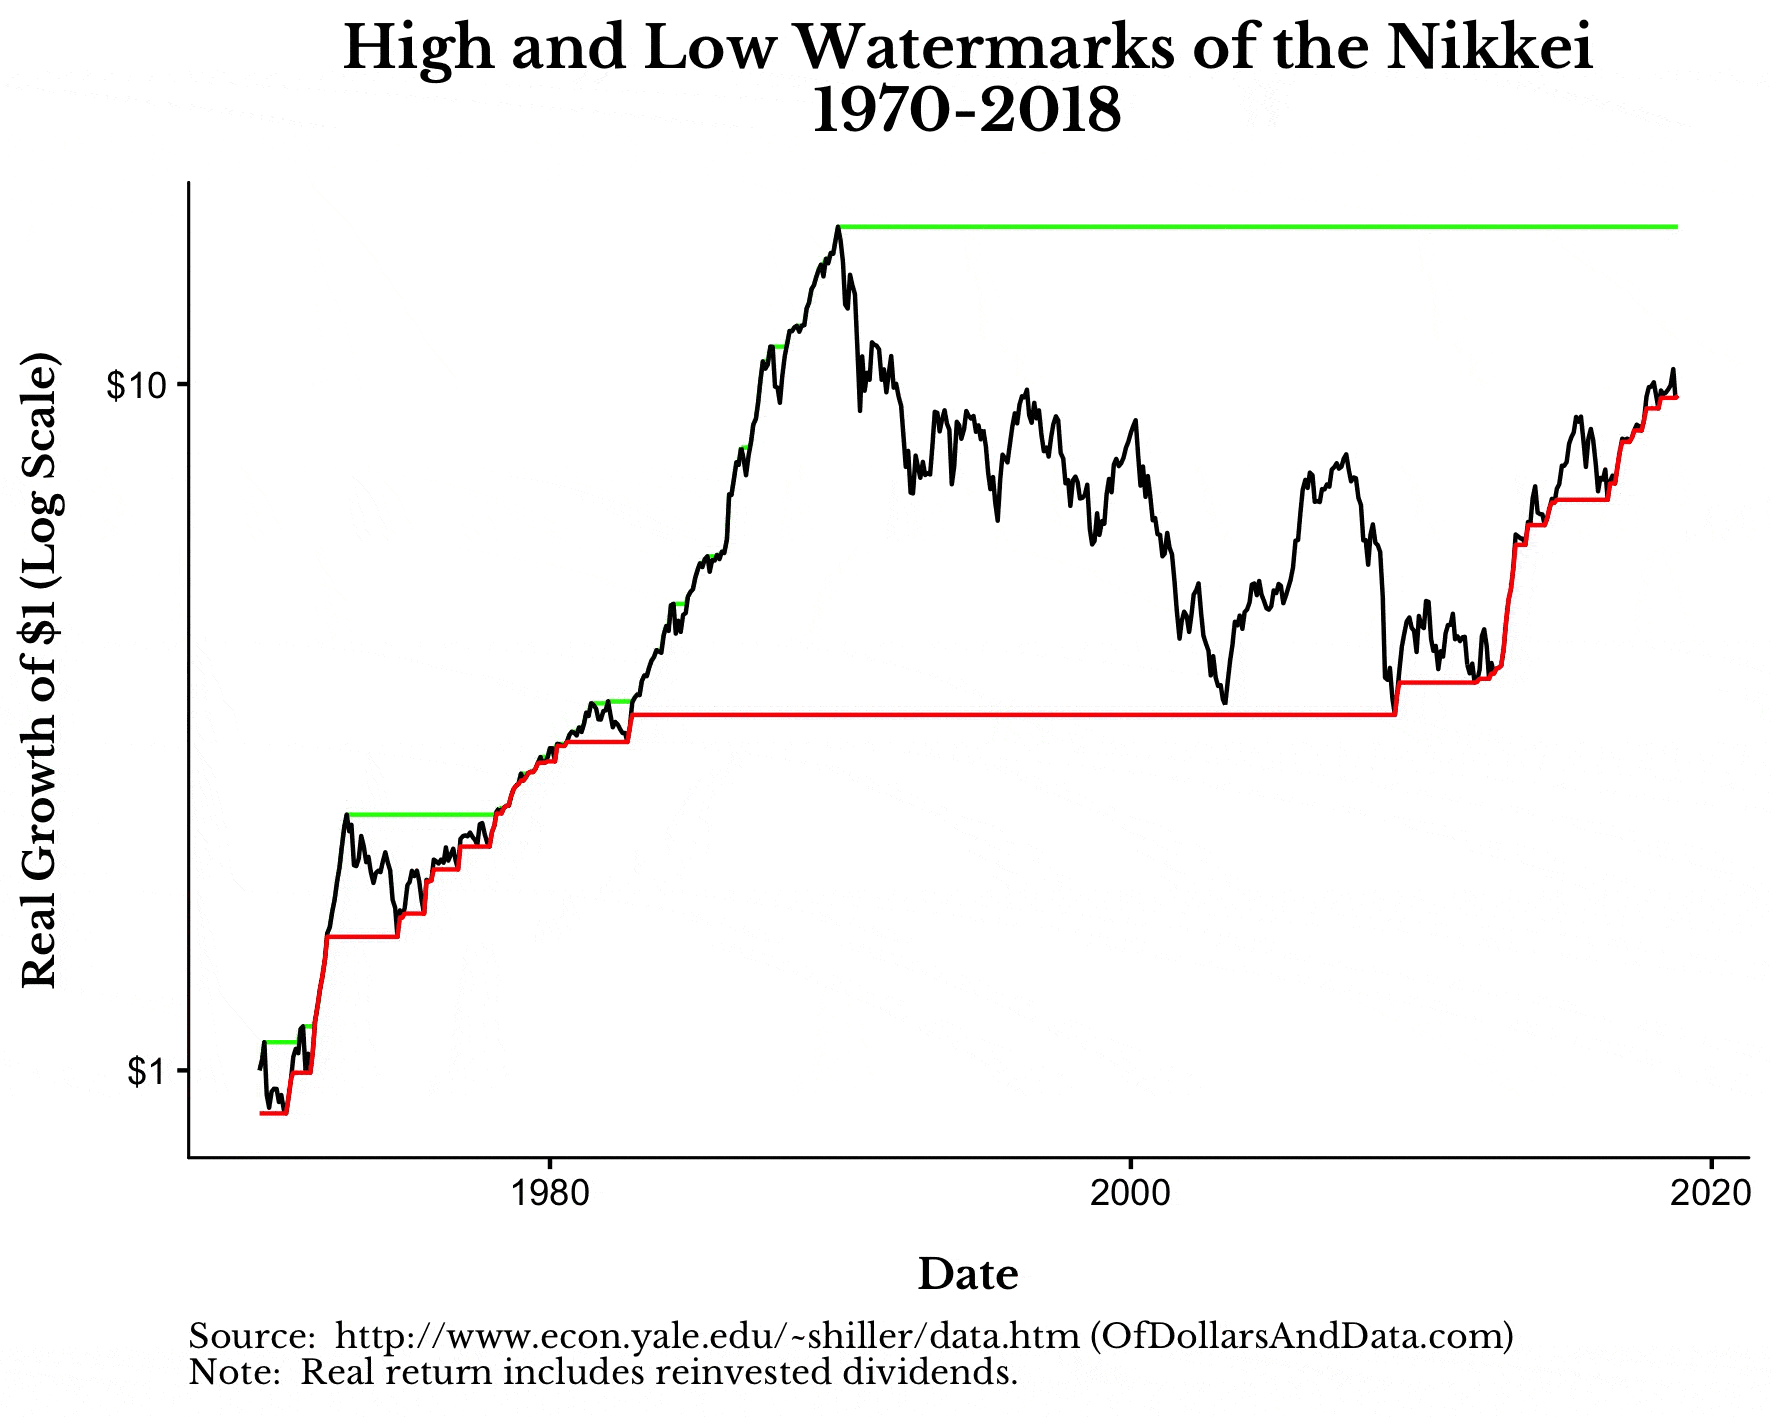 High and low watermarks for Nikkei from 1970-2018